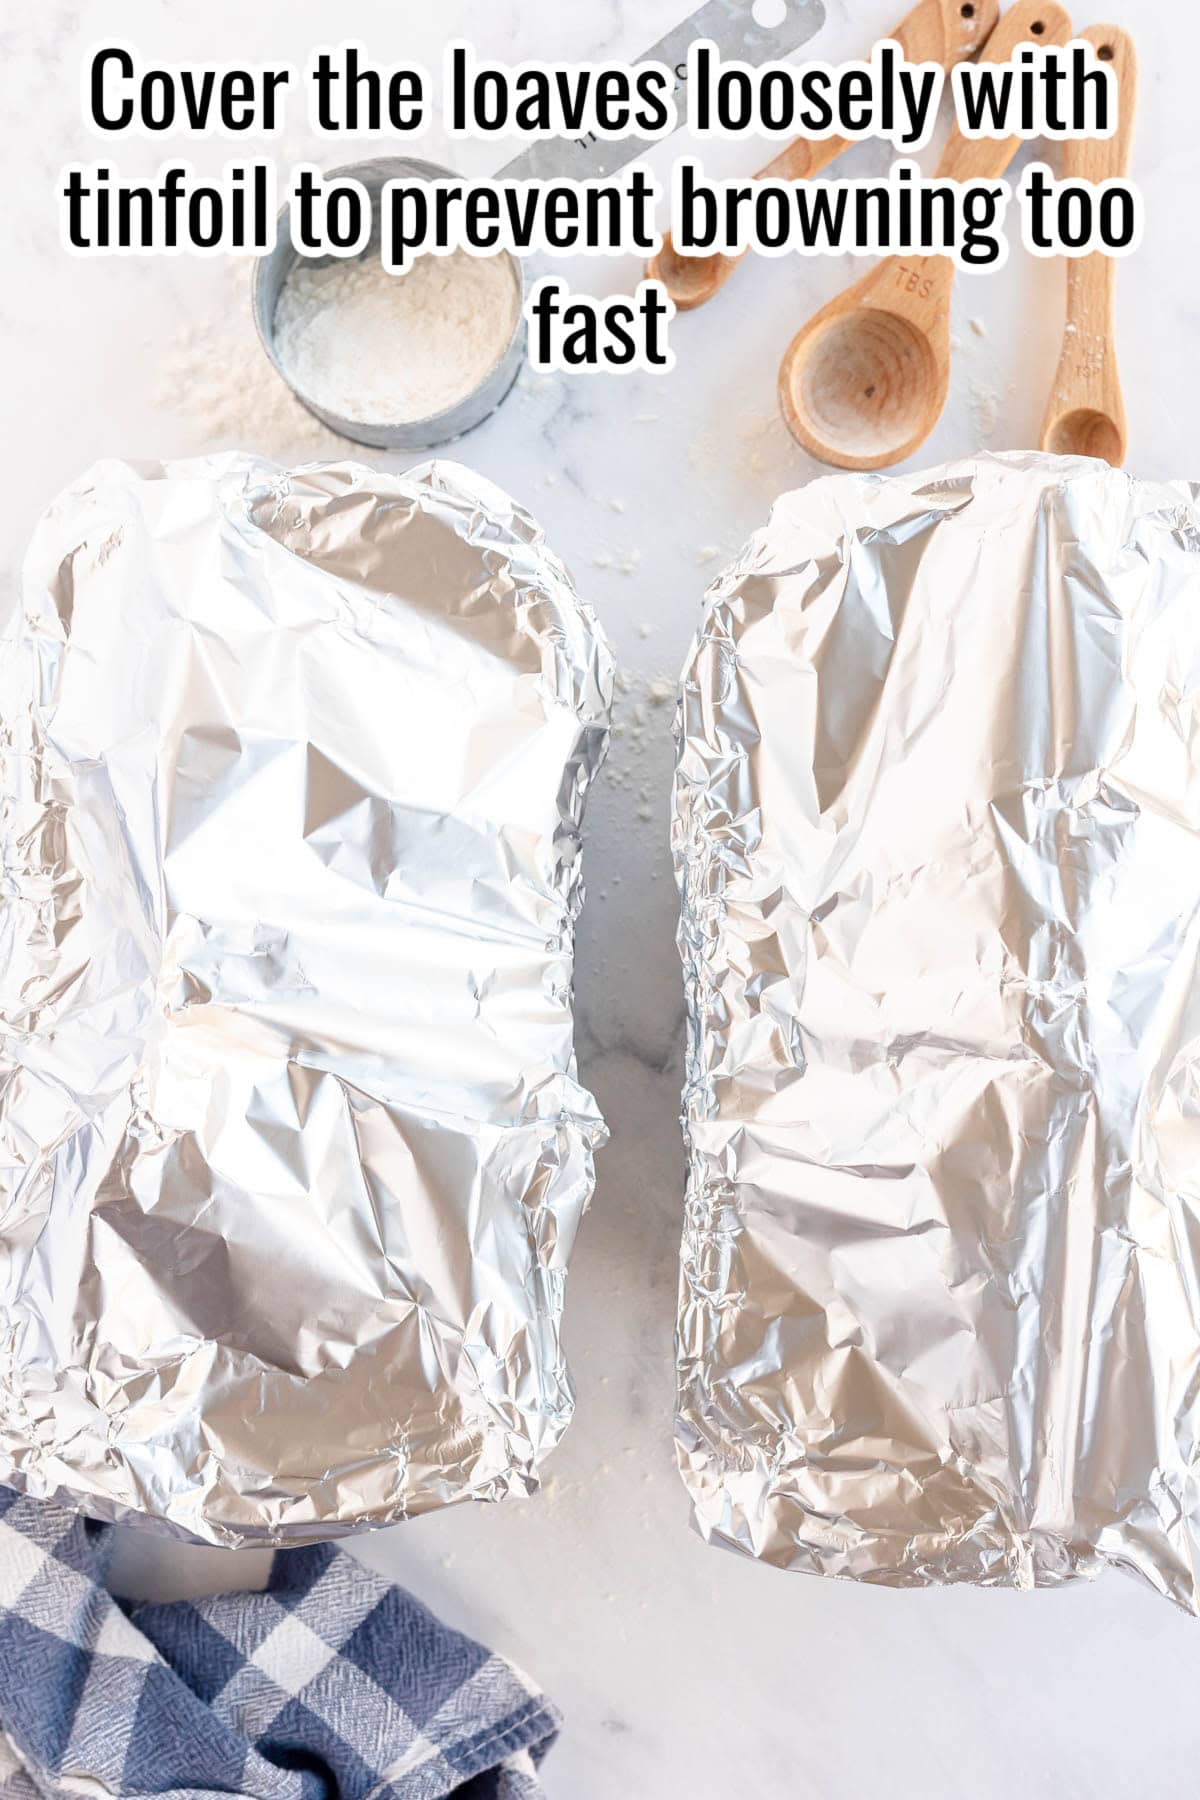 Two loaf pans covered with aluminum foil are on a white surface.